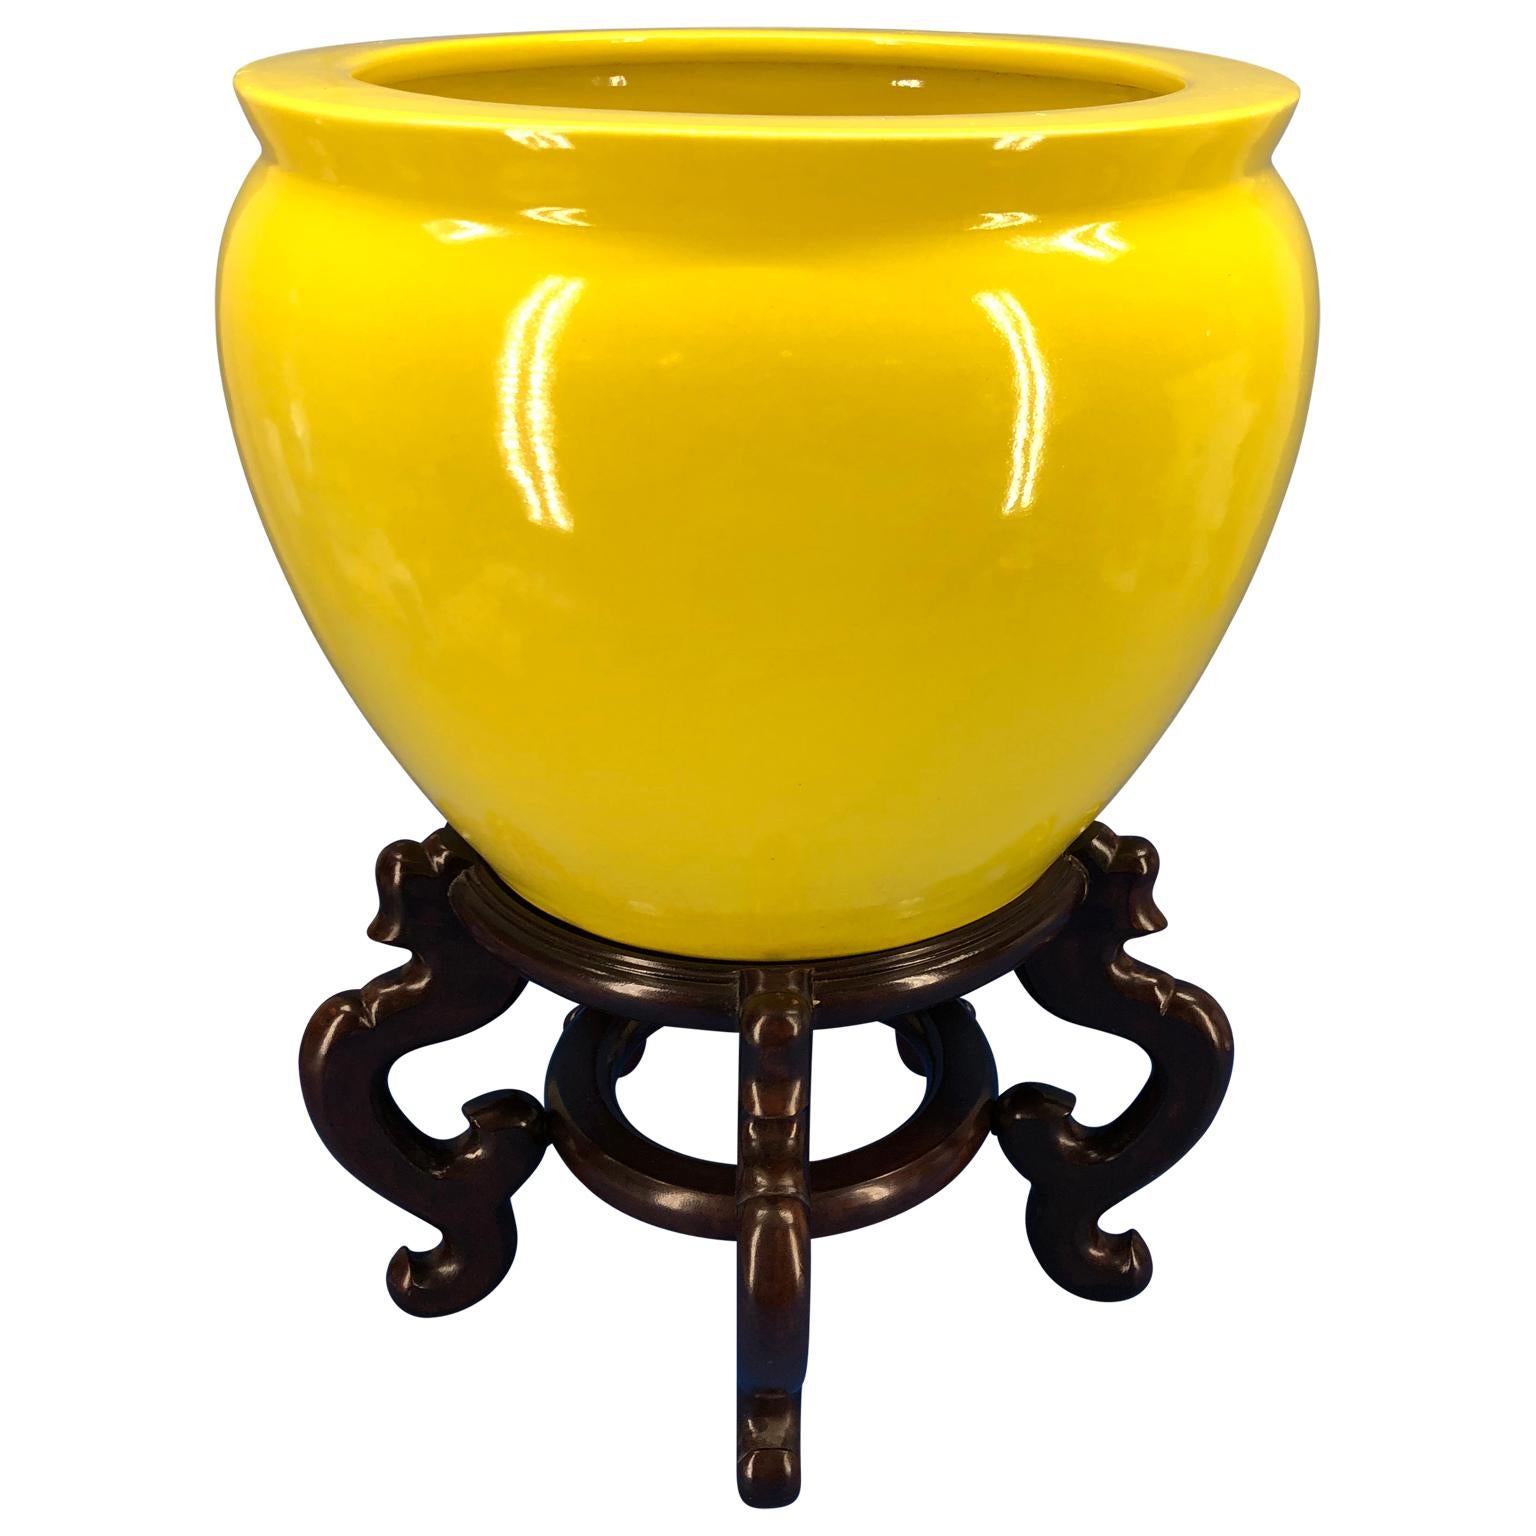 Hand-Crafted Large Bright Yellow Hand Painted Porcelain Jardinière Bowl on a Wooden Stand For Sale